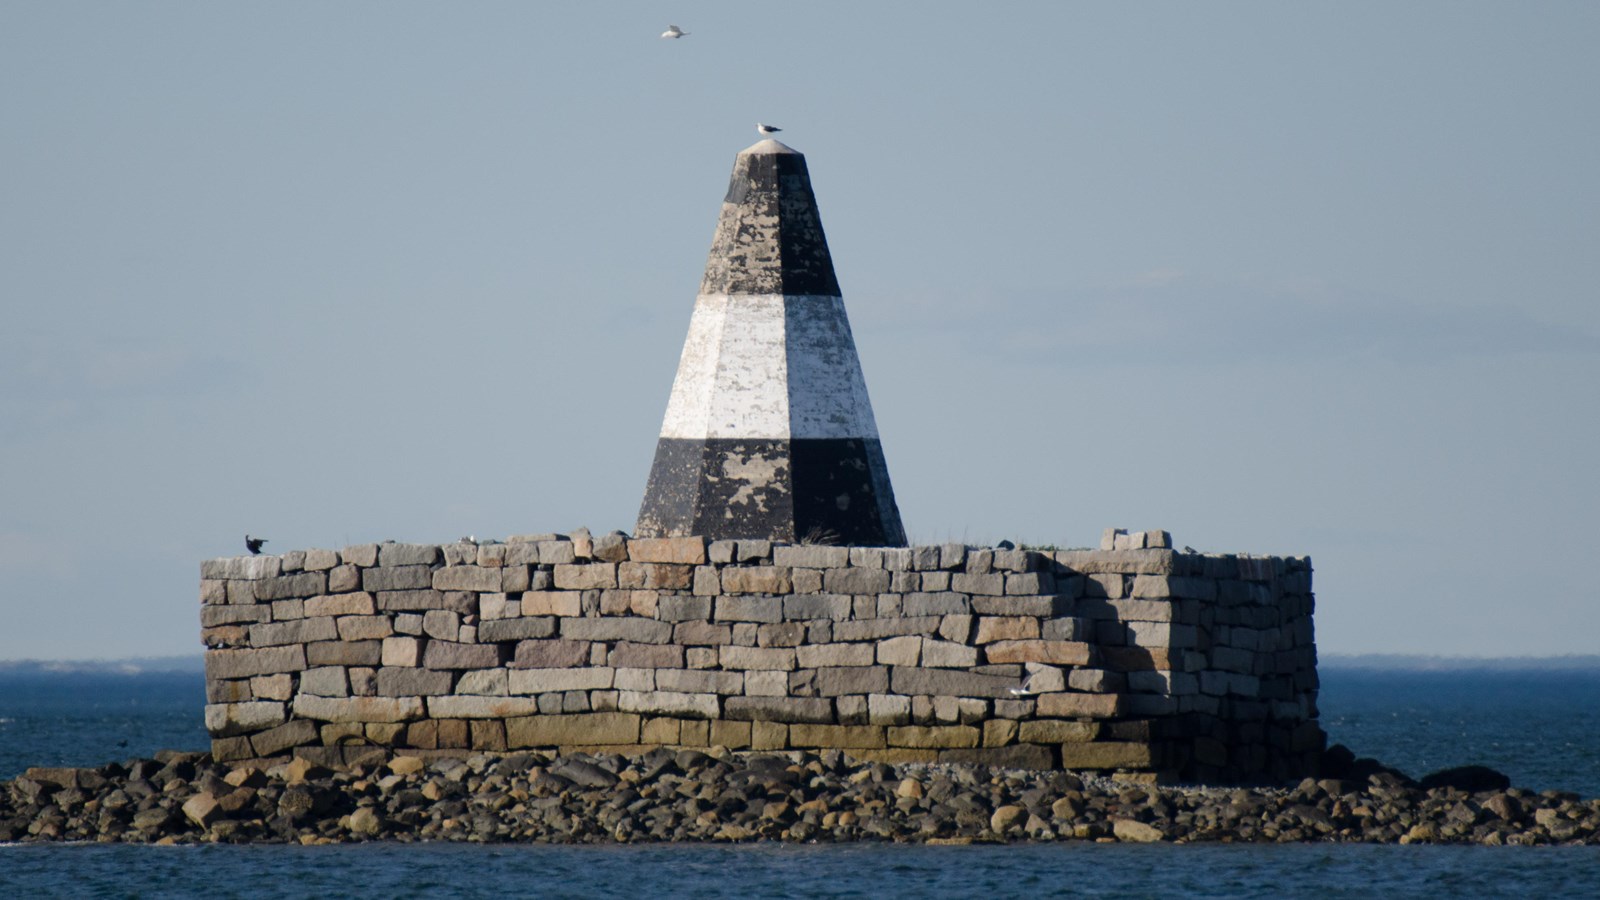 View from the water of a black and white triangle stick up from a platform built out of stone